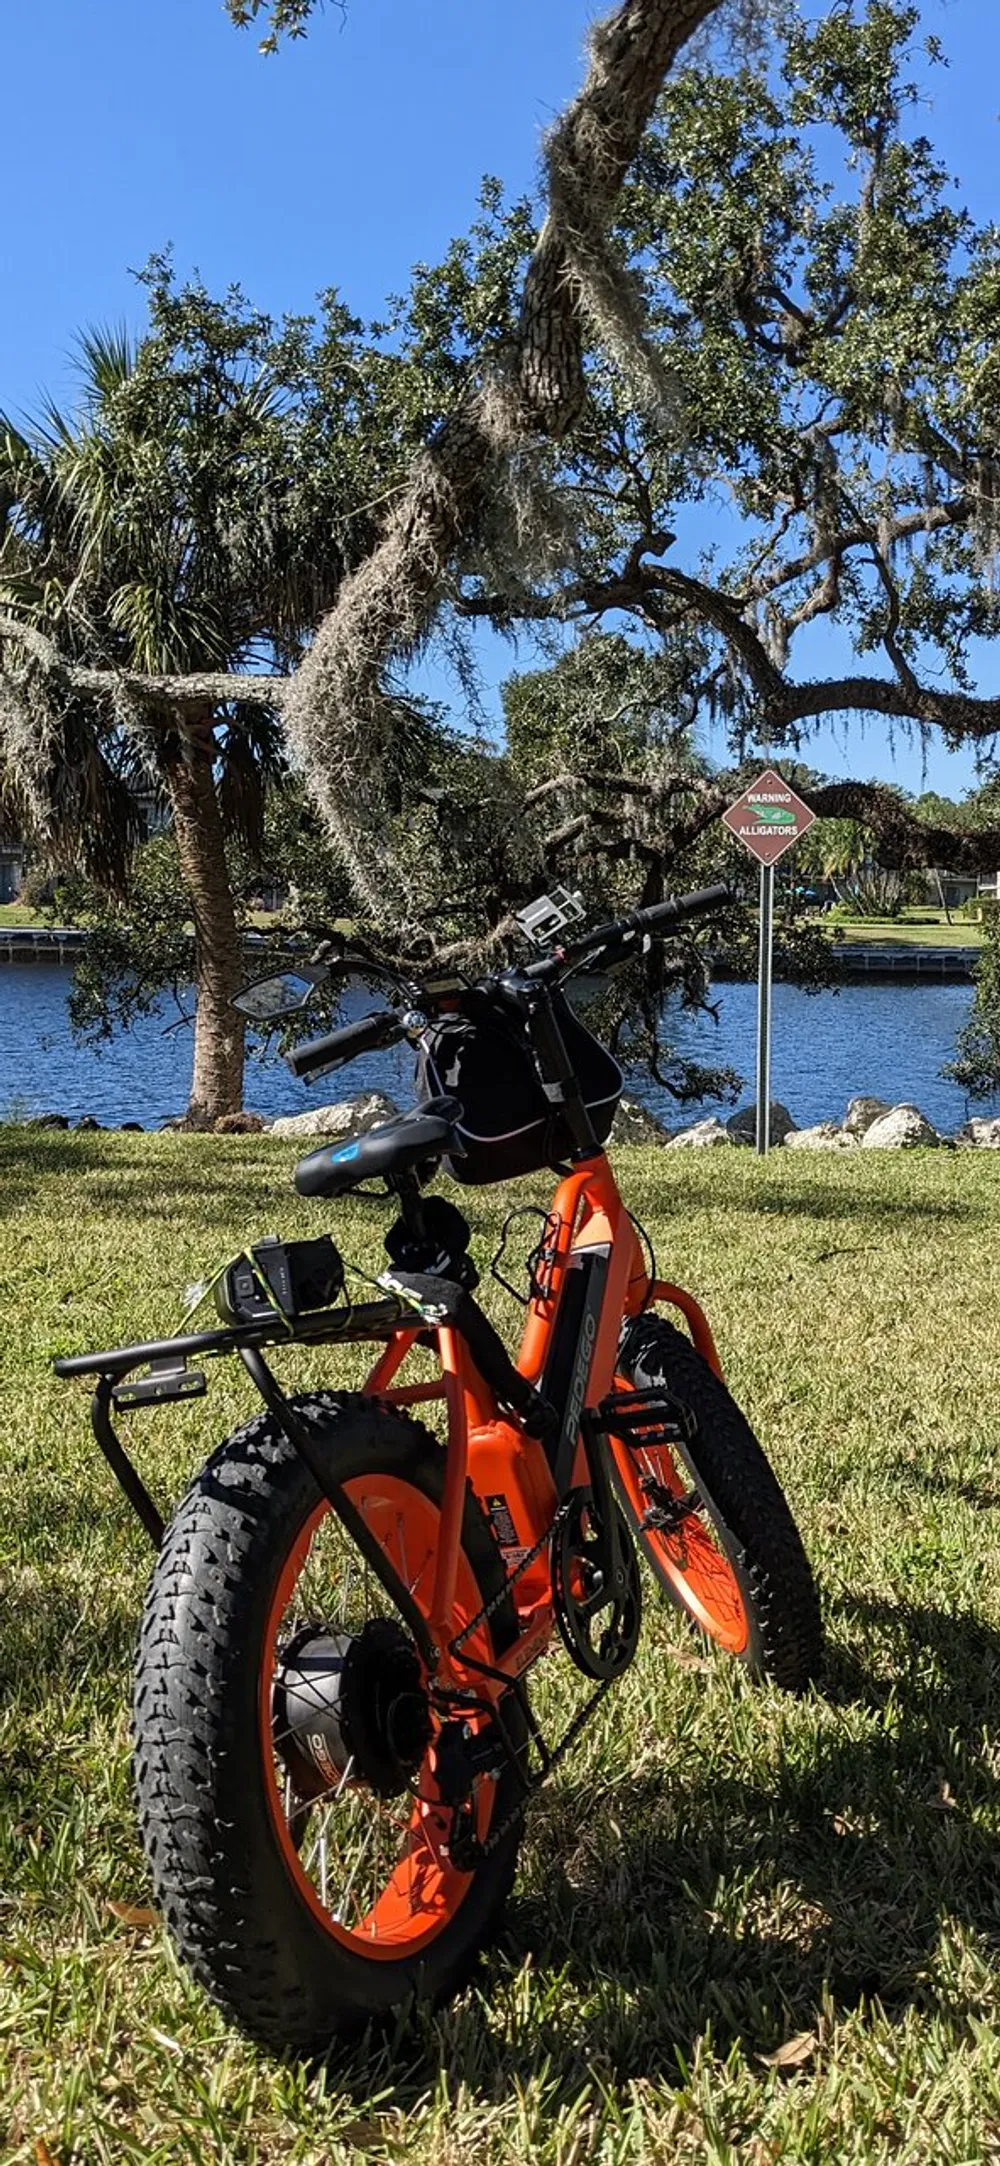 An orange electric bike with fat tires is parked on grass near a body of water with a Warning Alligators sign and Spanish moss-draped trees in the background